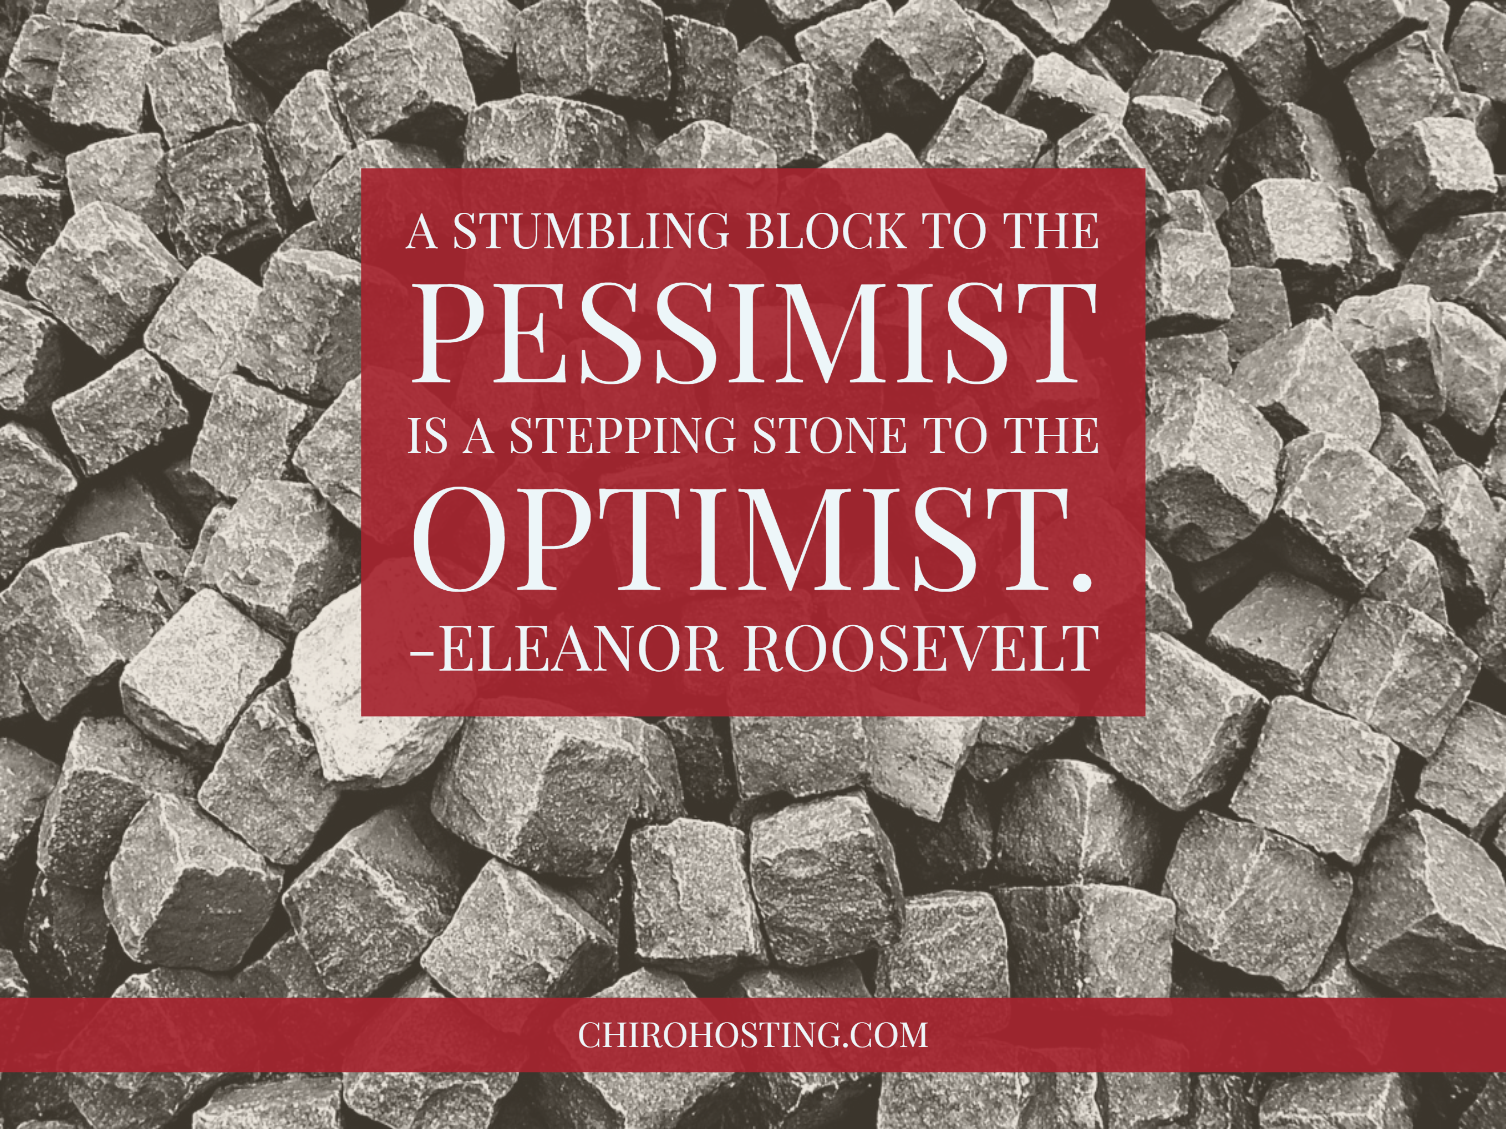 A Stumbling Block to the Pessimist Is a Stepping Stone to the Optimist